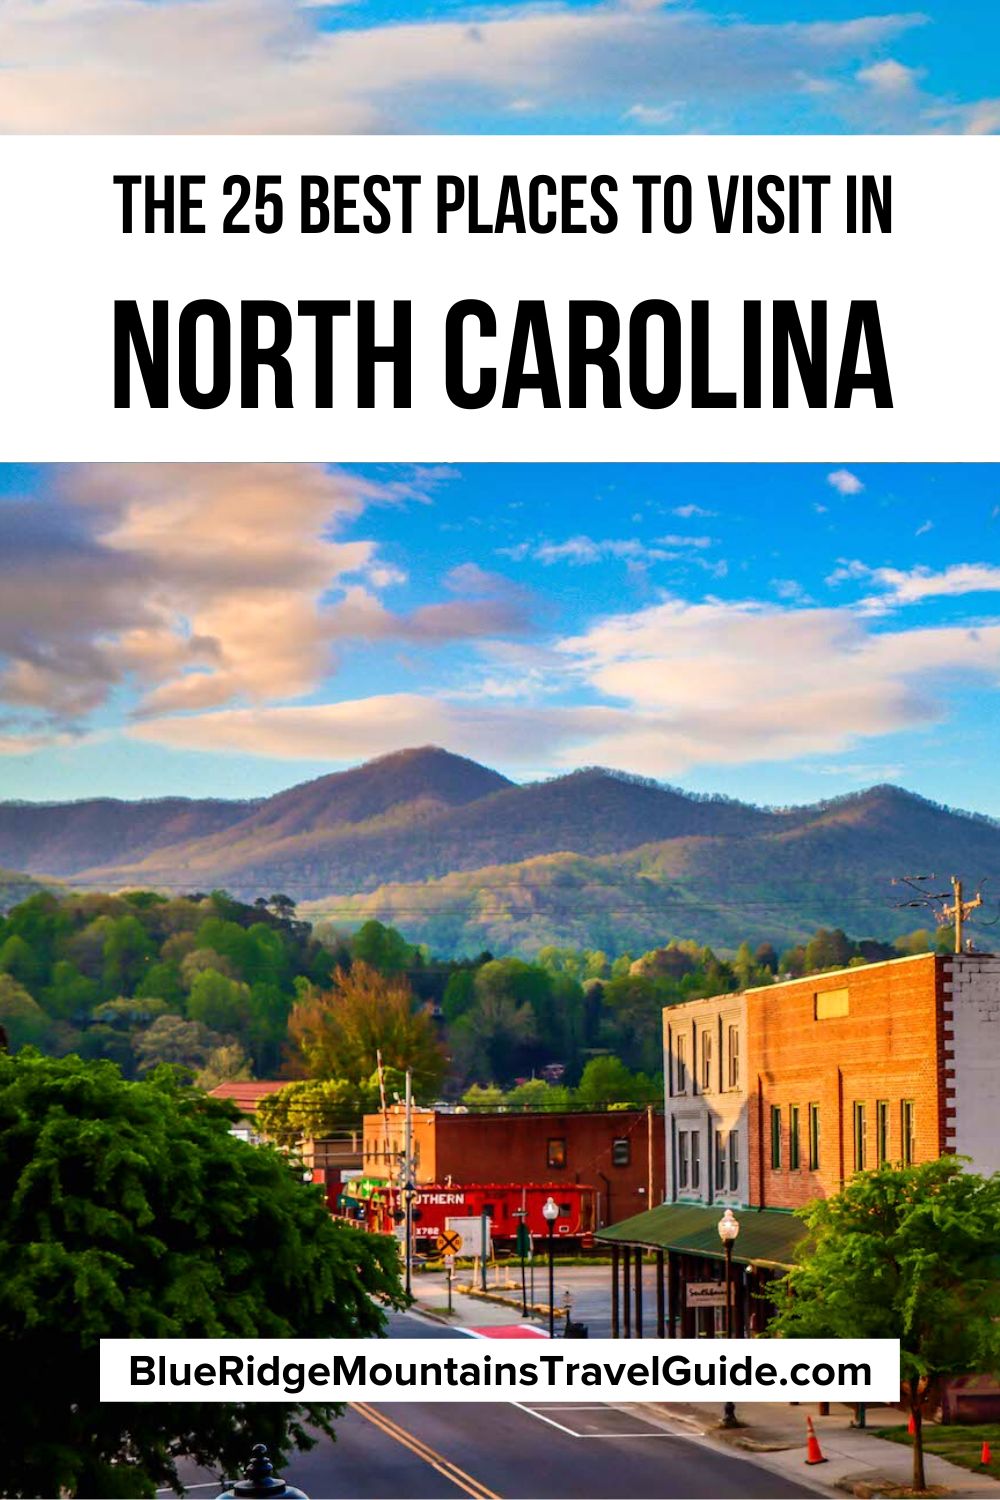 The 25 Best Places to Visit in North Carolina for 2023, including NC cities and towns as well as National Parks, State Parks, and other attractions. | north carolina attractions | north carolina places | places to go in north carolina | places to visit in nc | north carolina places to visit | best places to visit in nc | best places in nc | places to see in north carolina | things to see in north carolina | things to do in north carolina mountains | best cities to visit in north carolina |